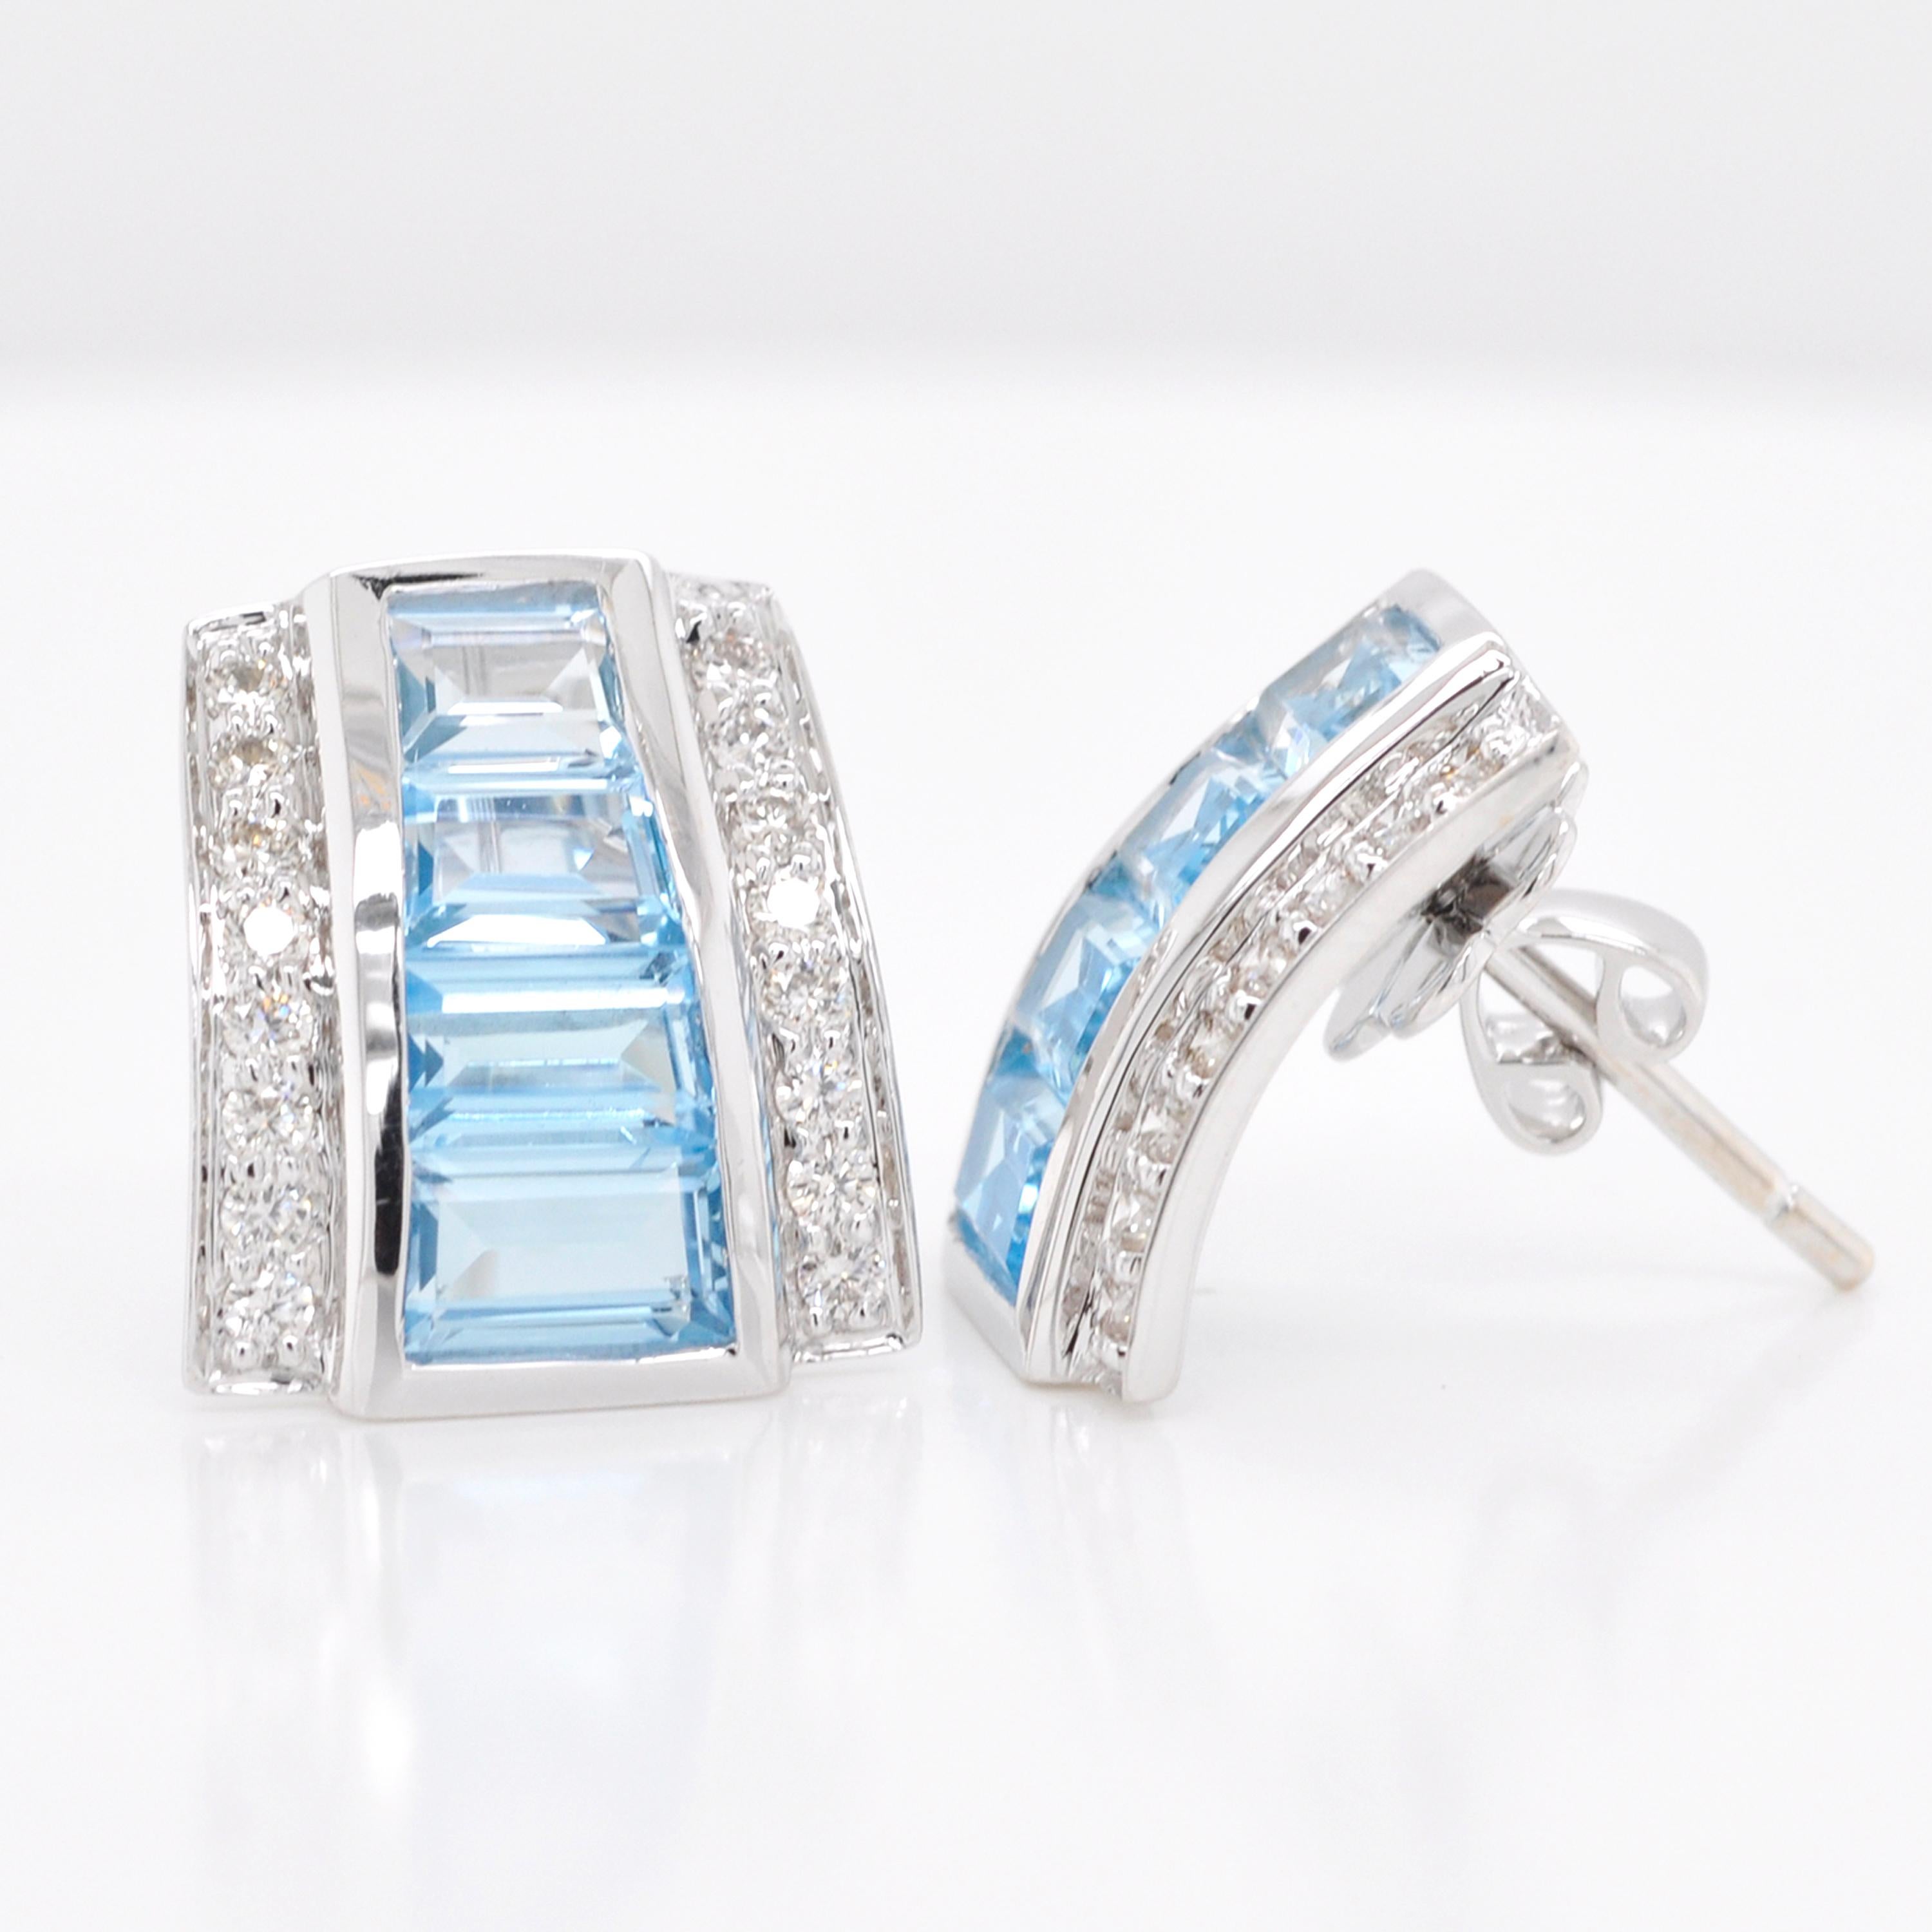 18 karat white gold art deco style blue topaz baguette diamond stud earrings

This incredible pastel hues of blue in blue topaz diamond stud earrings is mesmerizing. The impressive channel setting of the baguette cut gemstones is enclosed in a